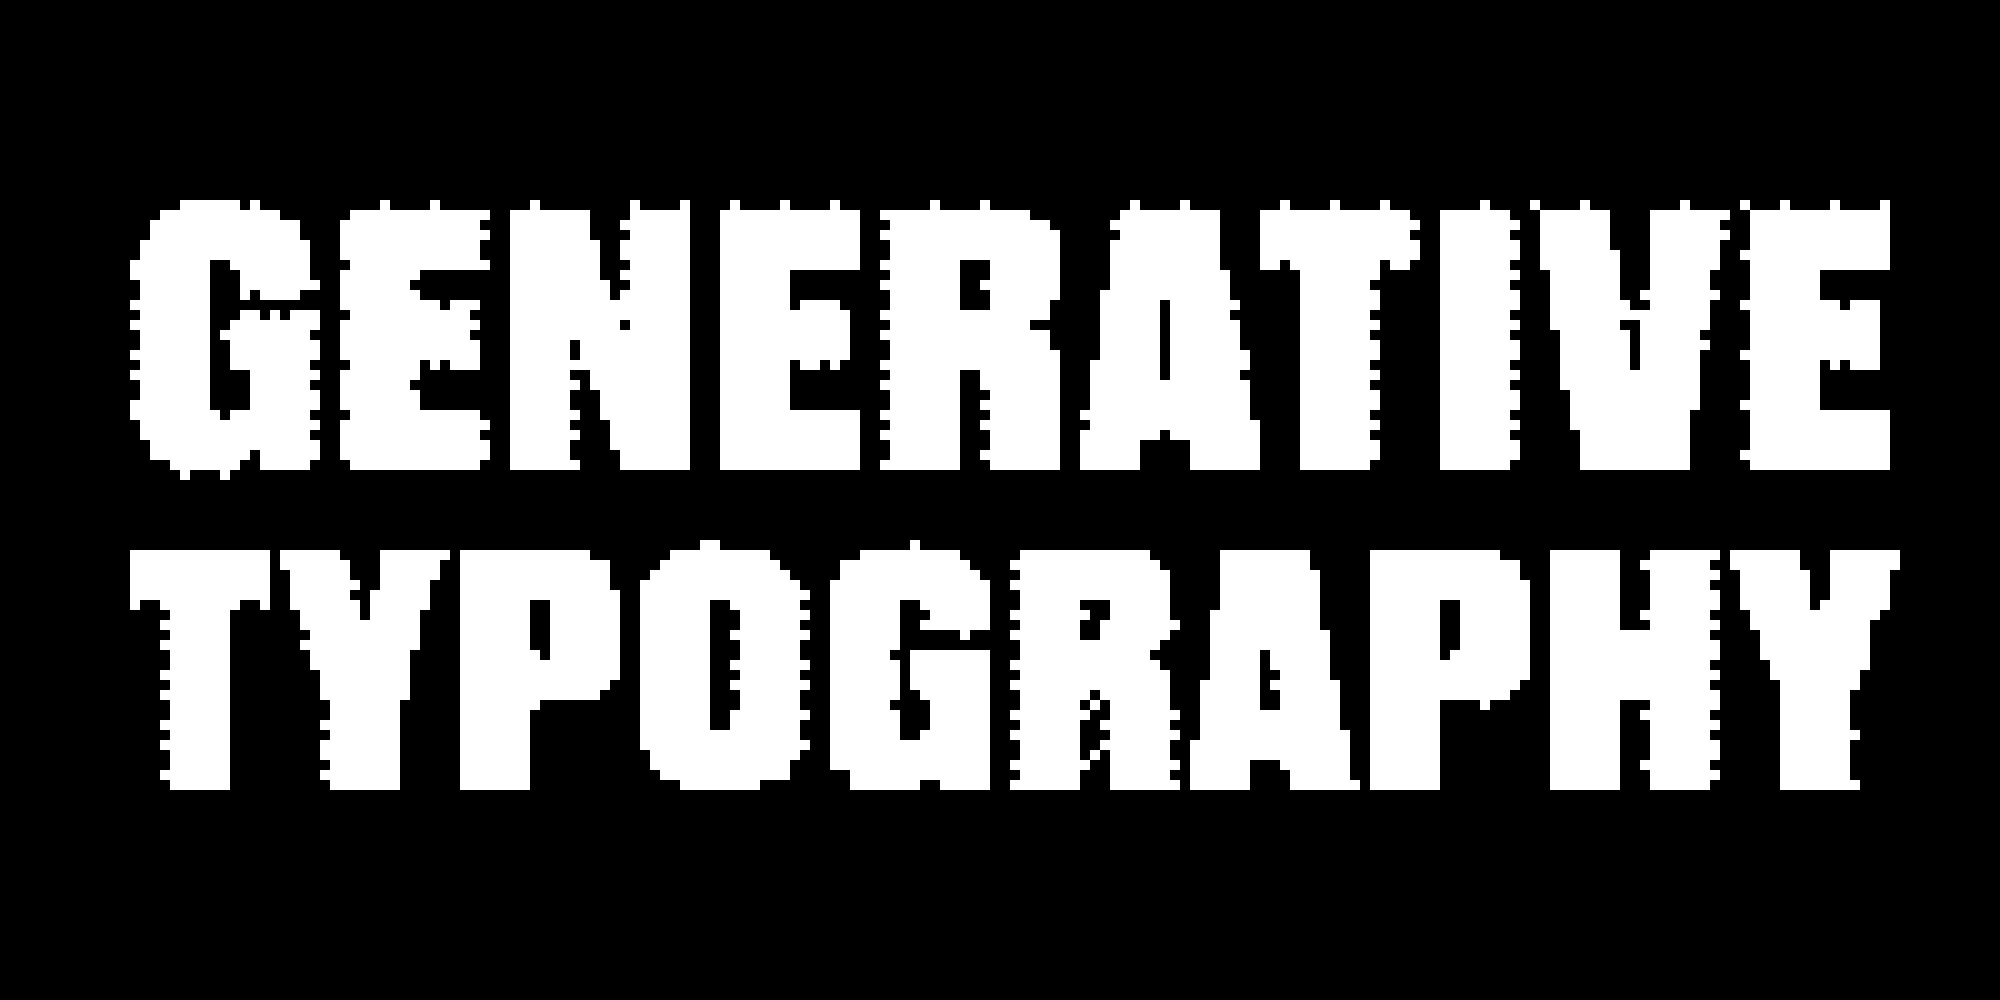 Words "Generative Typography" getting dispersed and pixellated, white type on black background